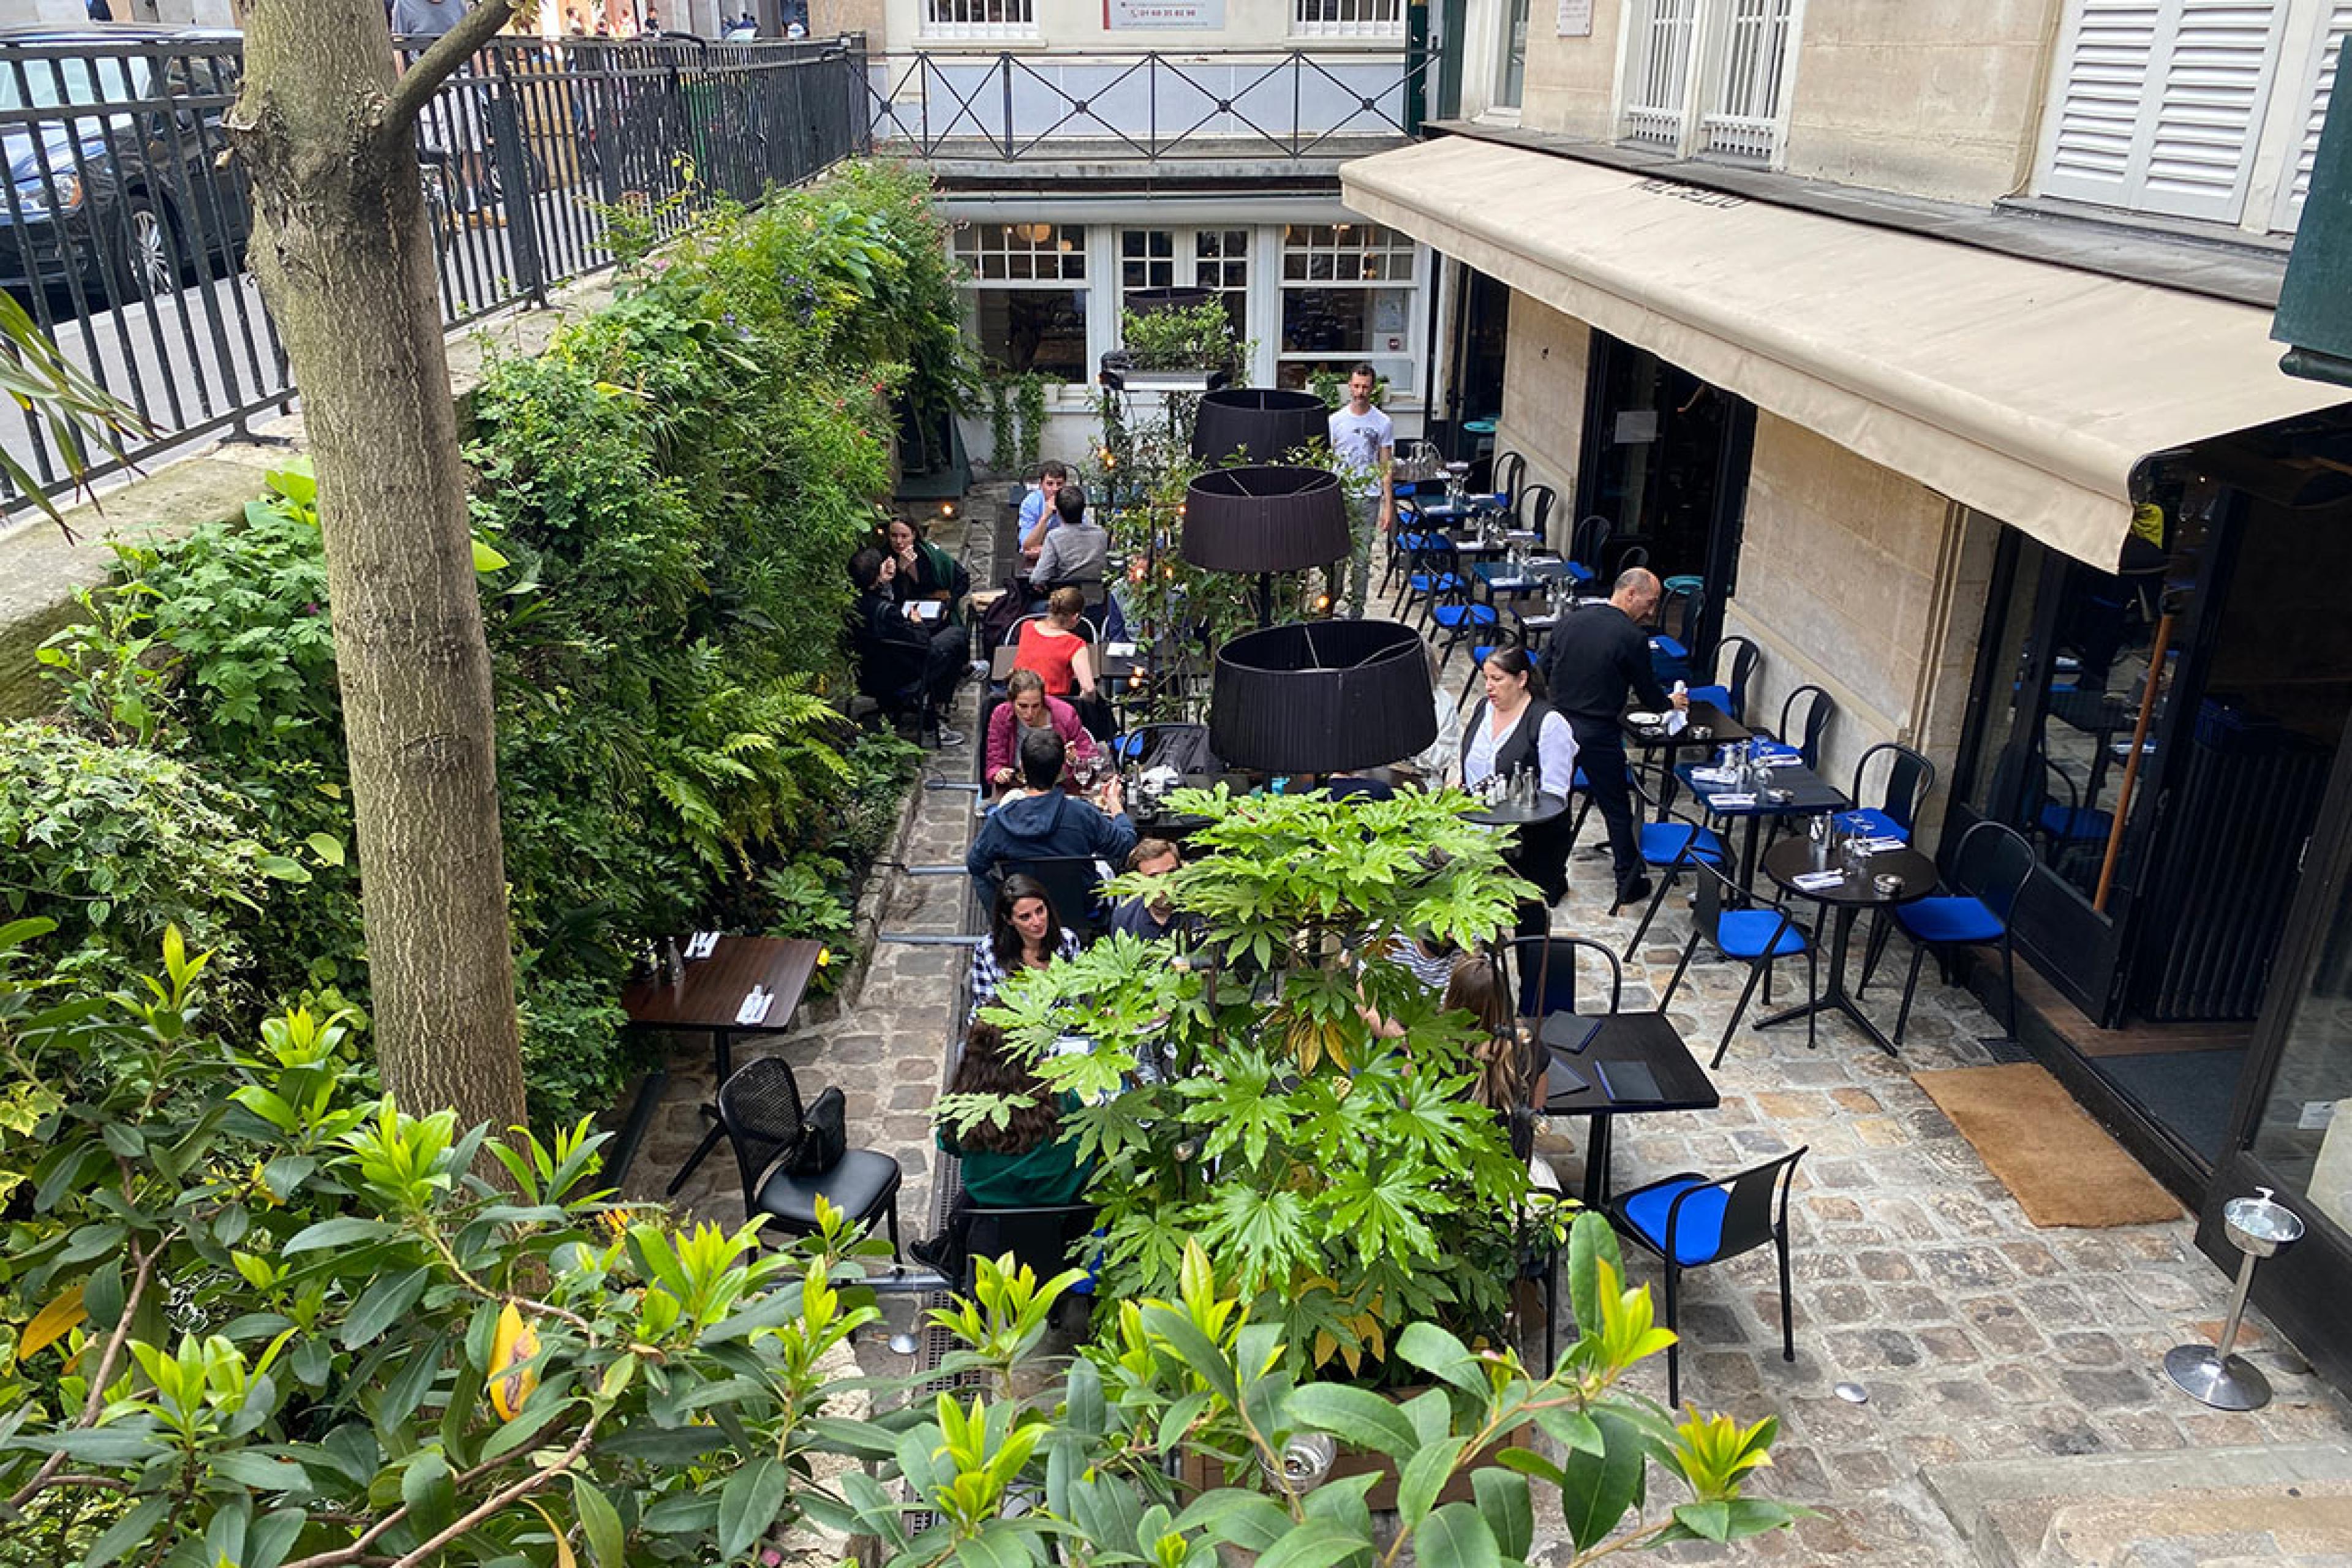 view looking down into ground-level outdoor cafe in paris